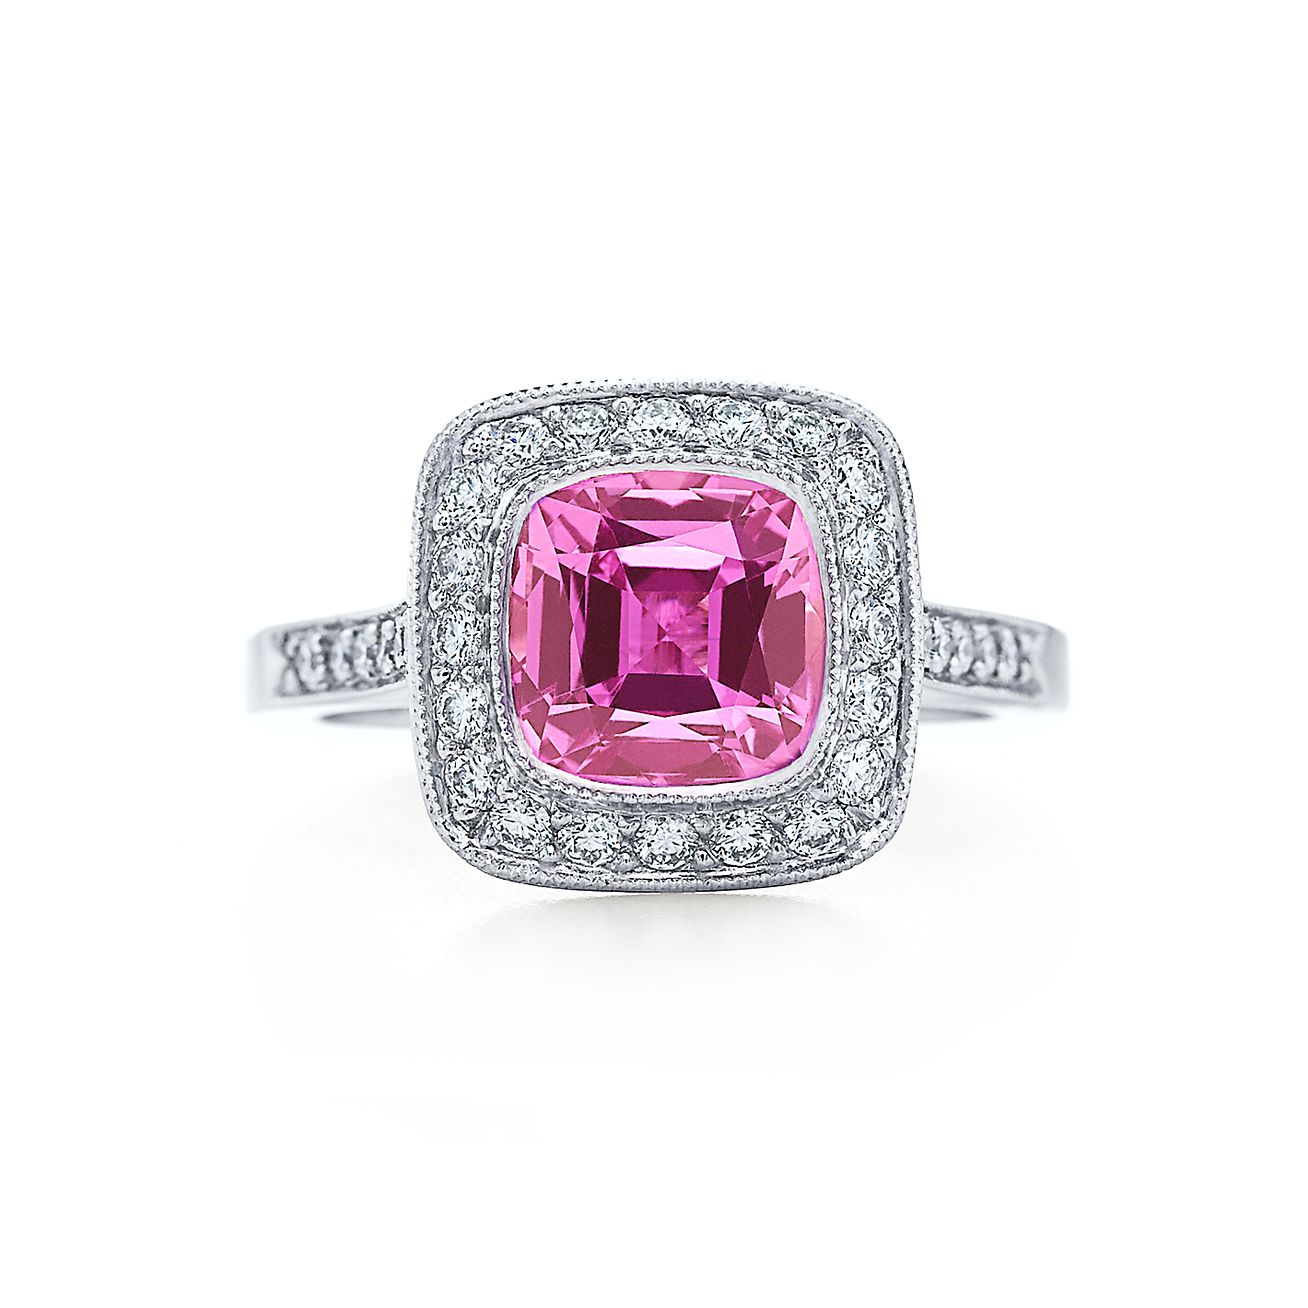 Tiffany Legacy® pink sapphire ring in 